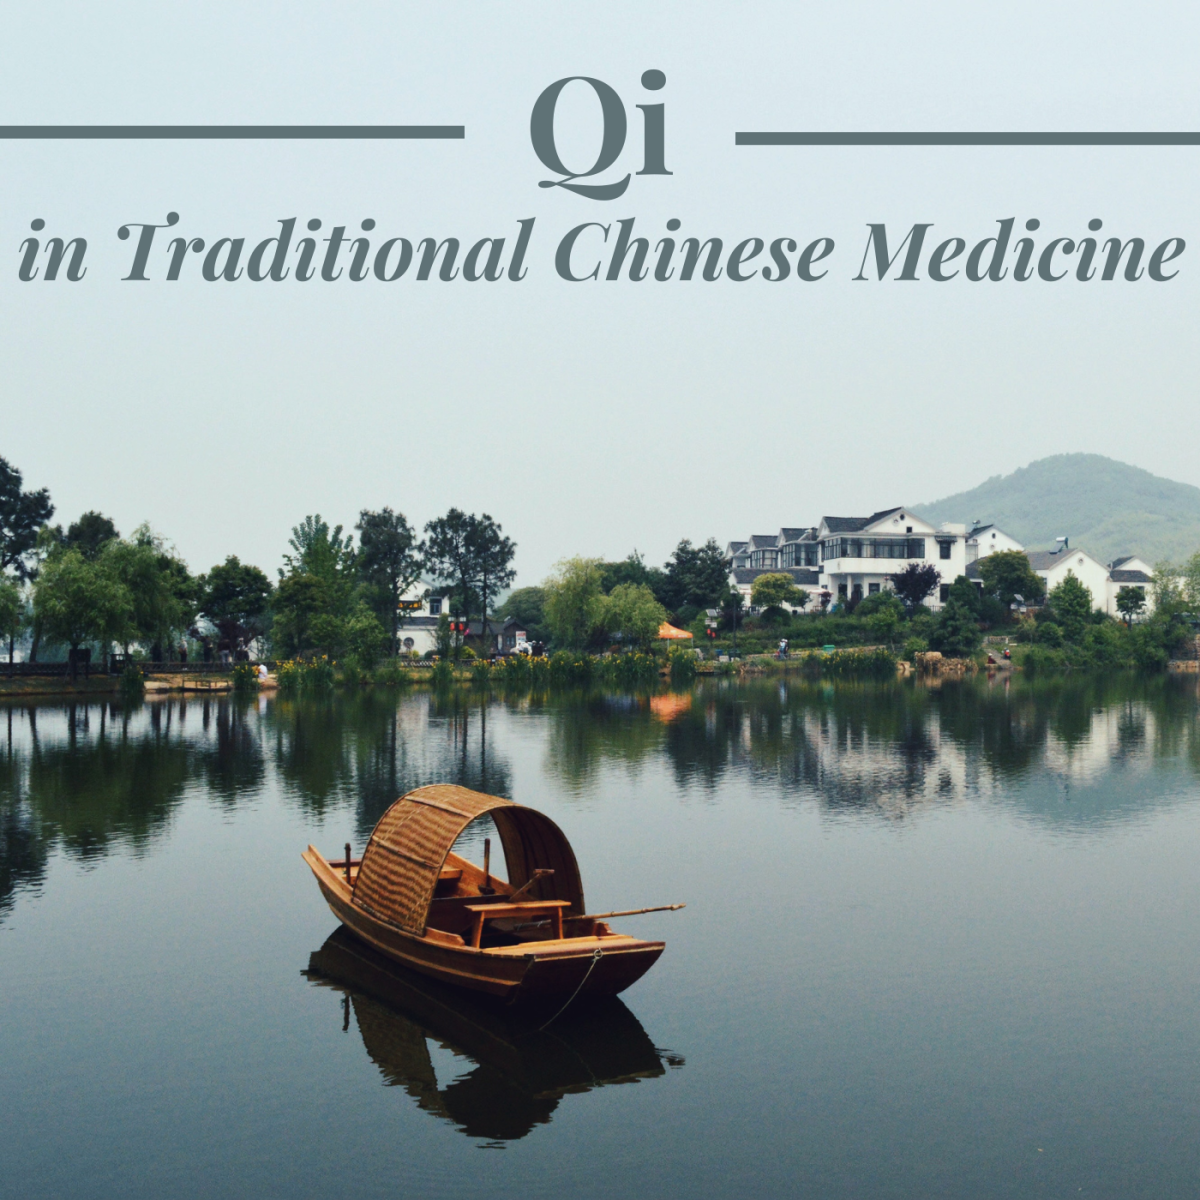 Qi in Traditional Chinese Medicine - Discover the Different Types